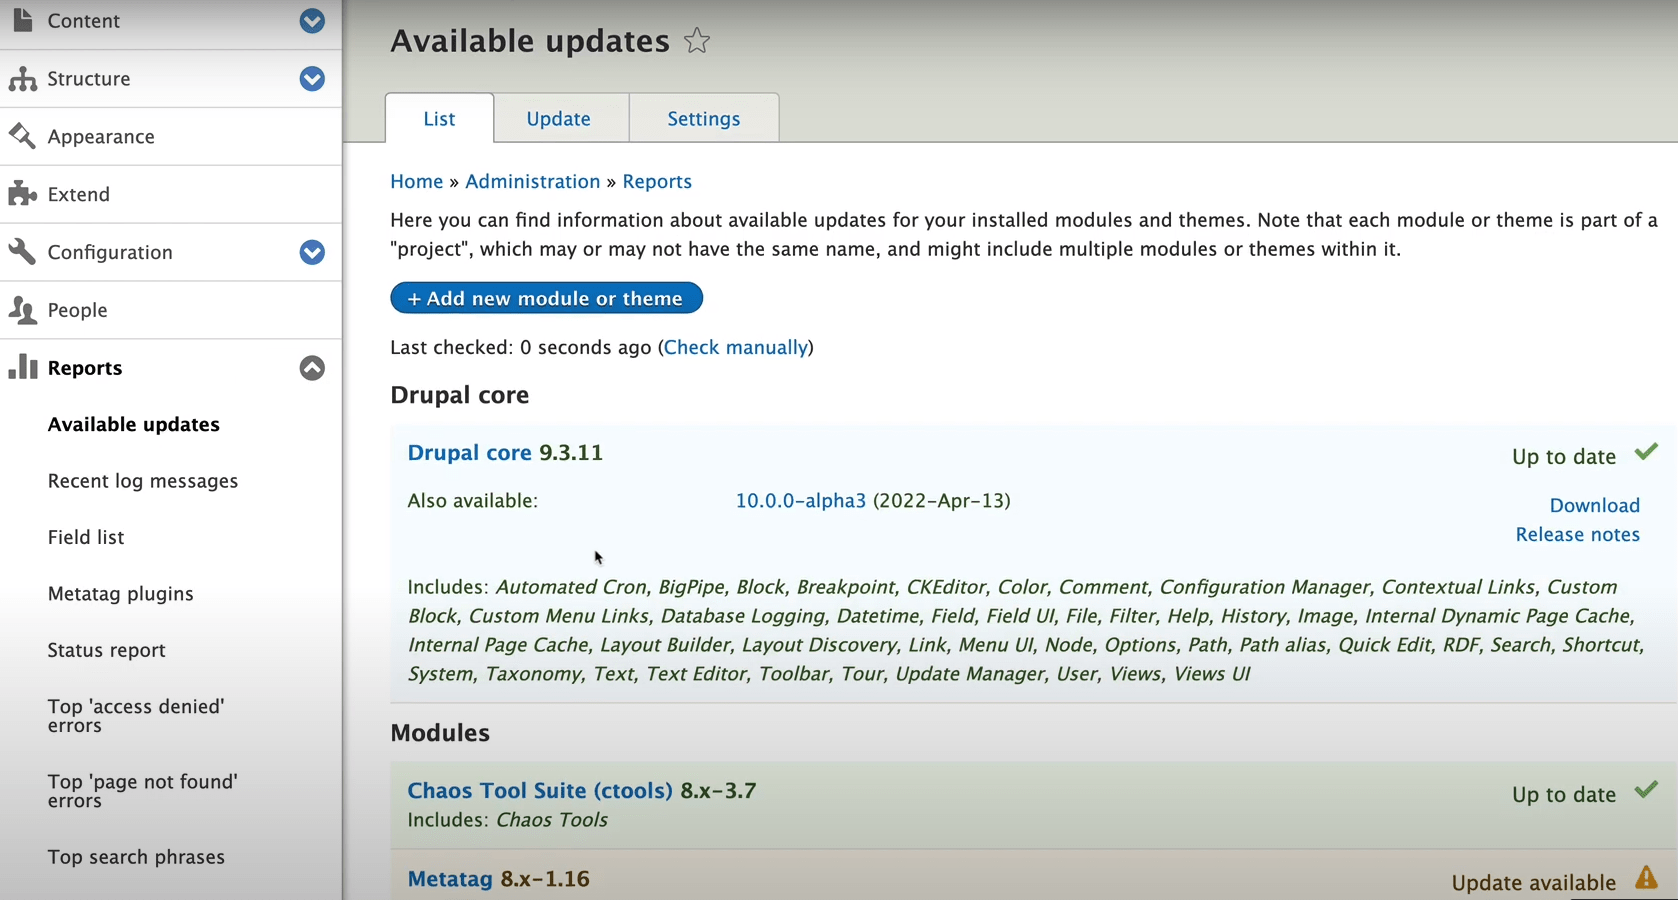 Drupal core up-to-date